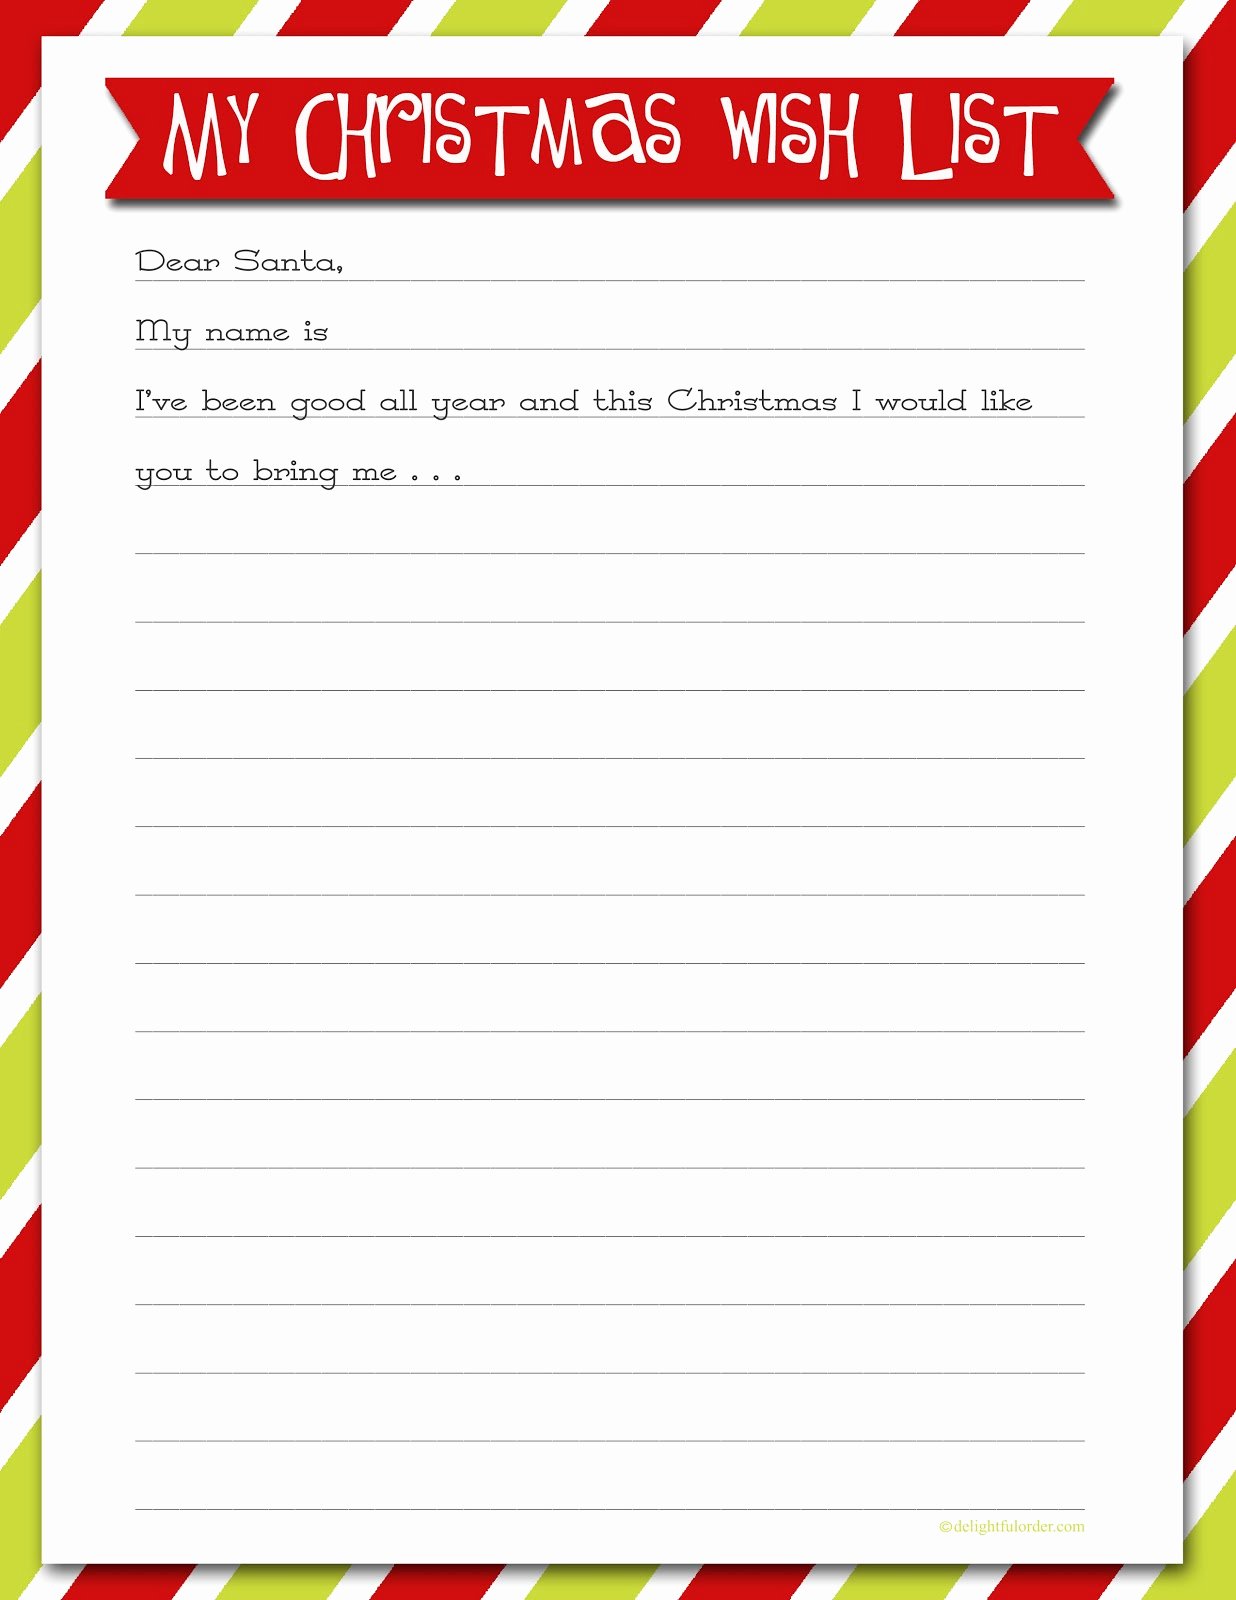 Printable Christmas Wish Lists are We there yet